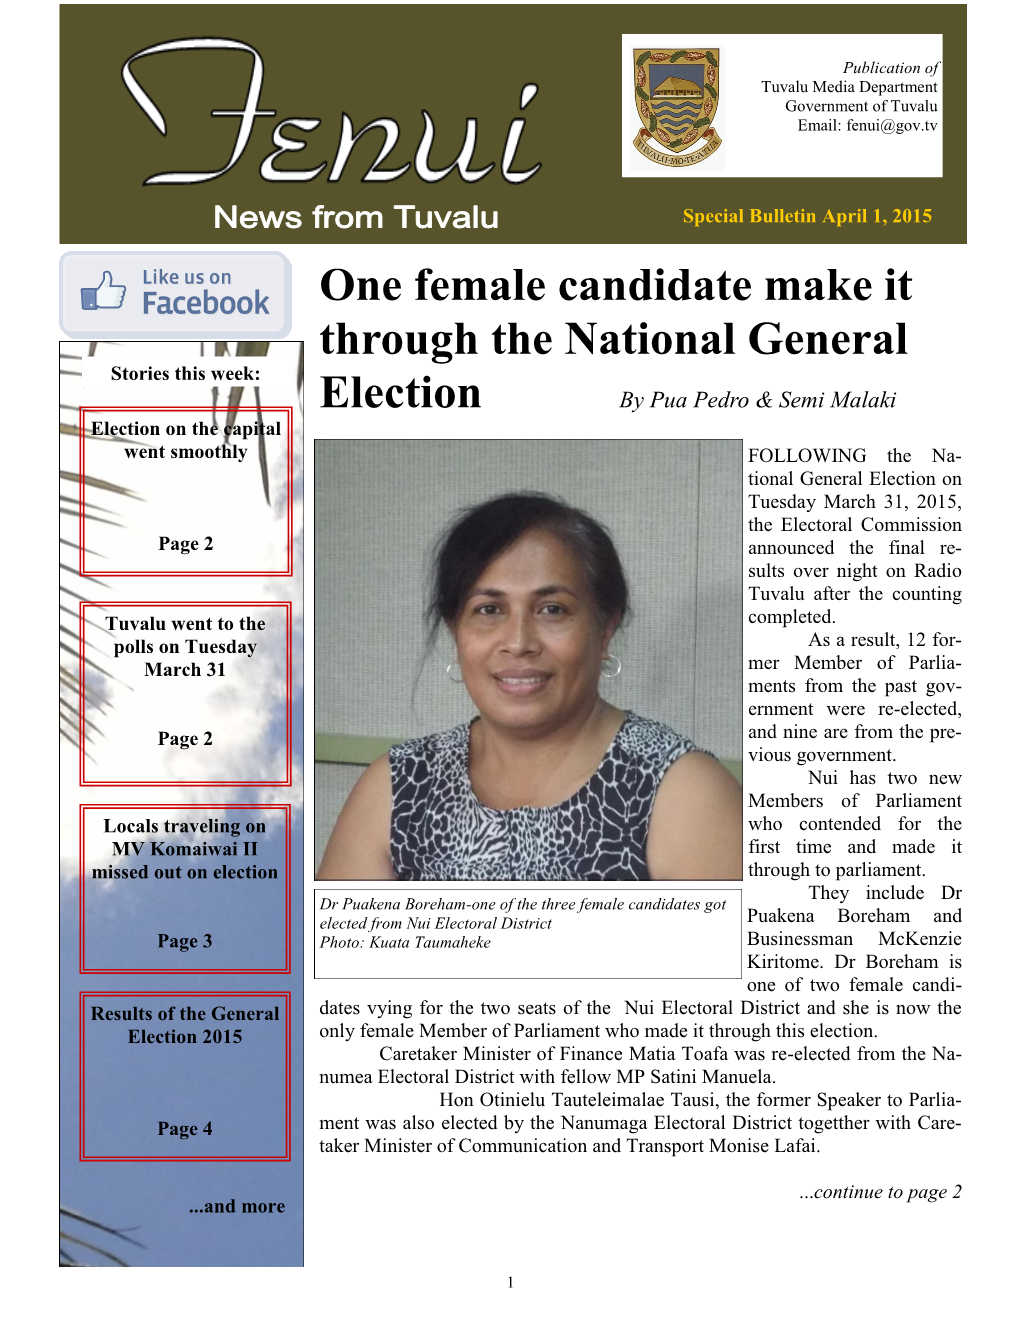 One Female Candidate Make It Through the National General Election